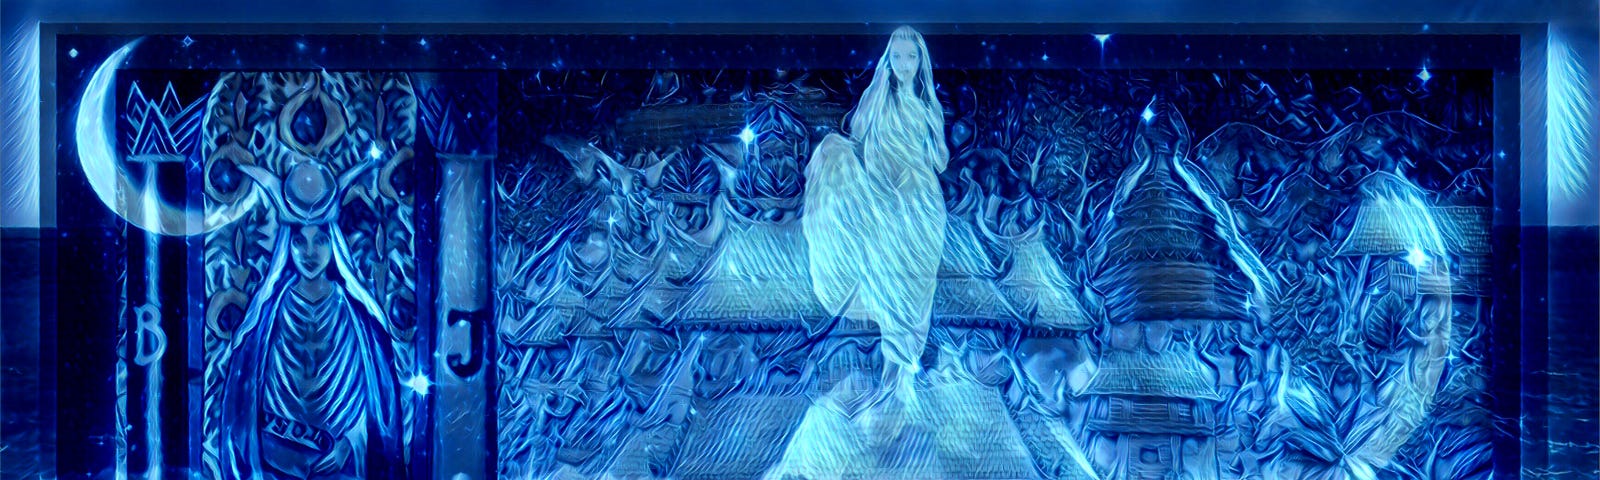 The High Priestess tarot card is on the left with a young girl in white in the middle. The entire photo is shades of blue.